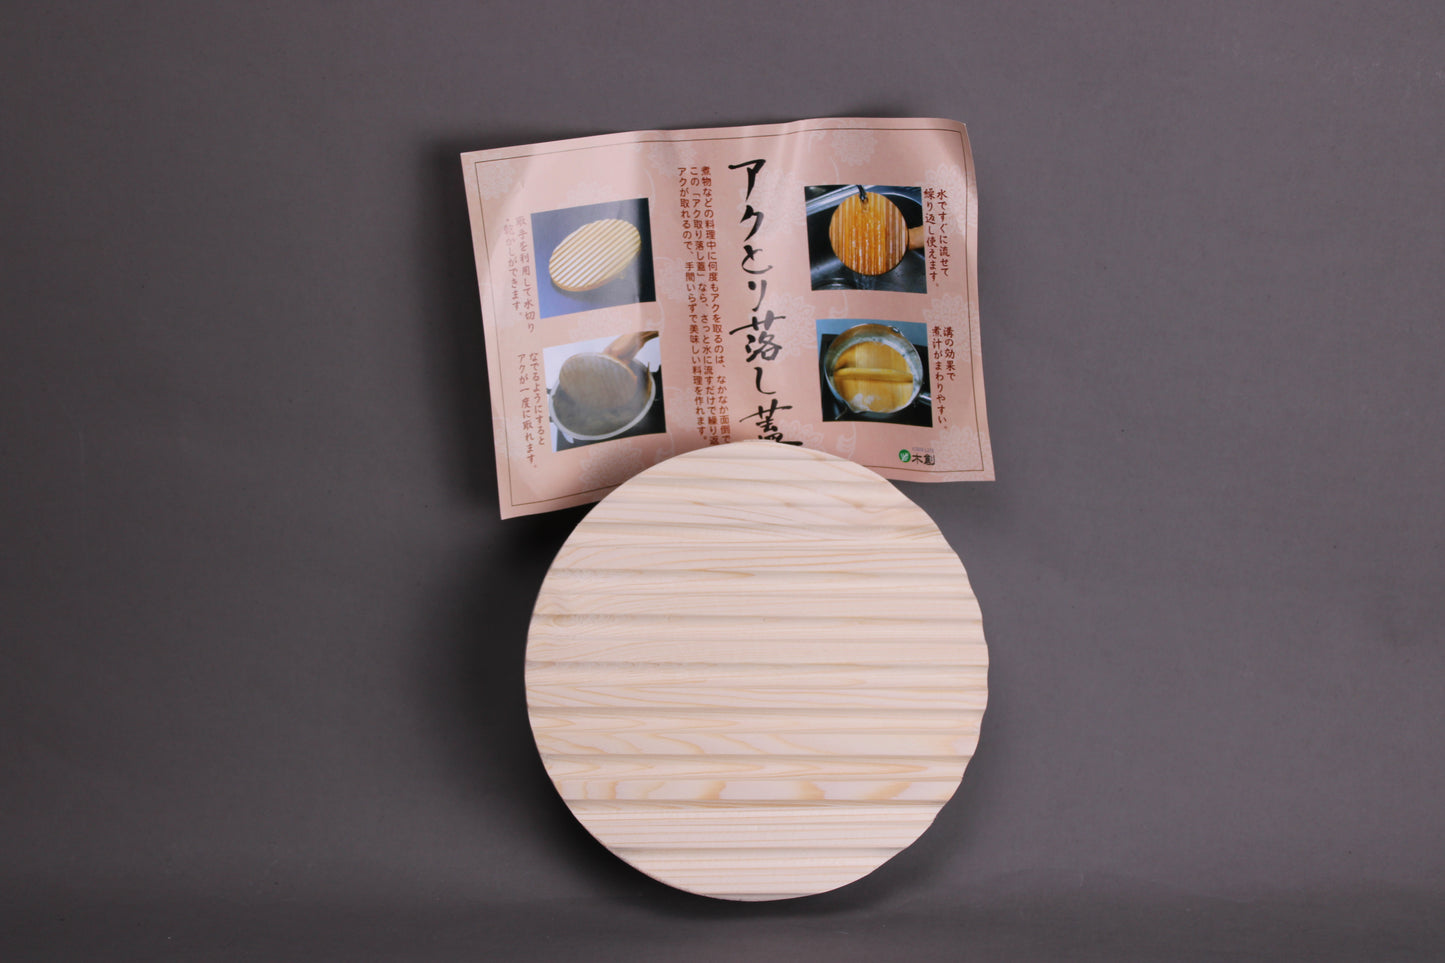 wooden drop lid skimmer otoshibuta for nimono by yamacoh youbi kisou life beside product paper with hiragana stating brand and product back side